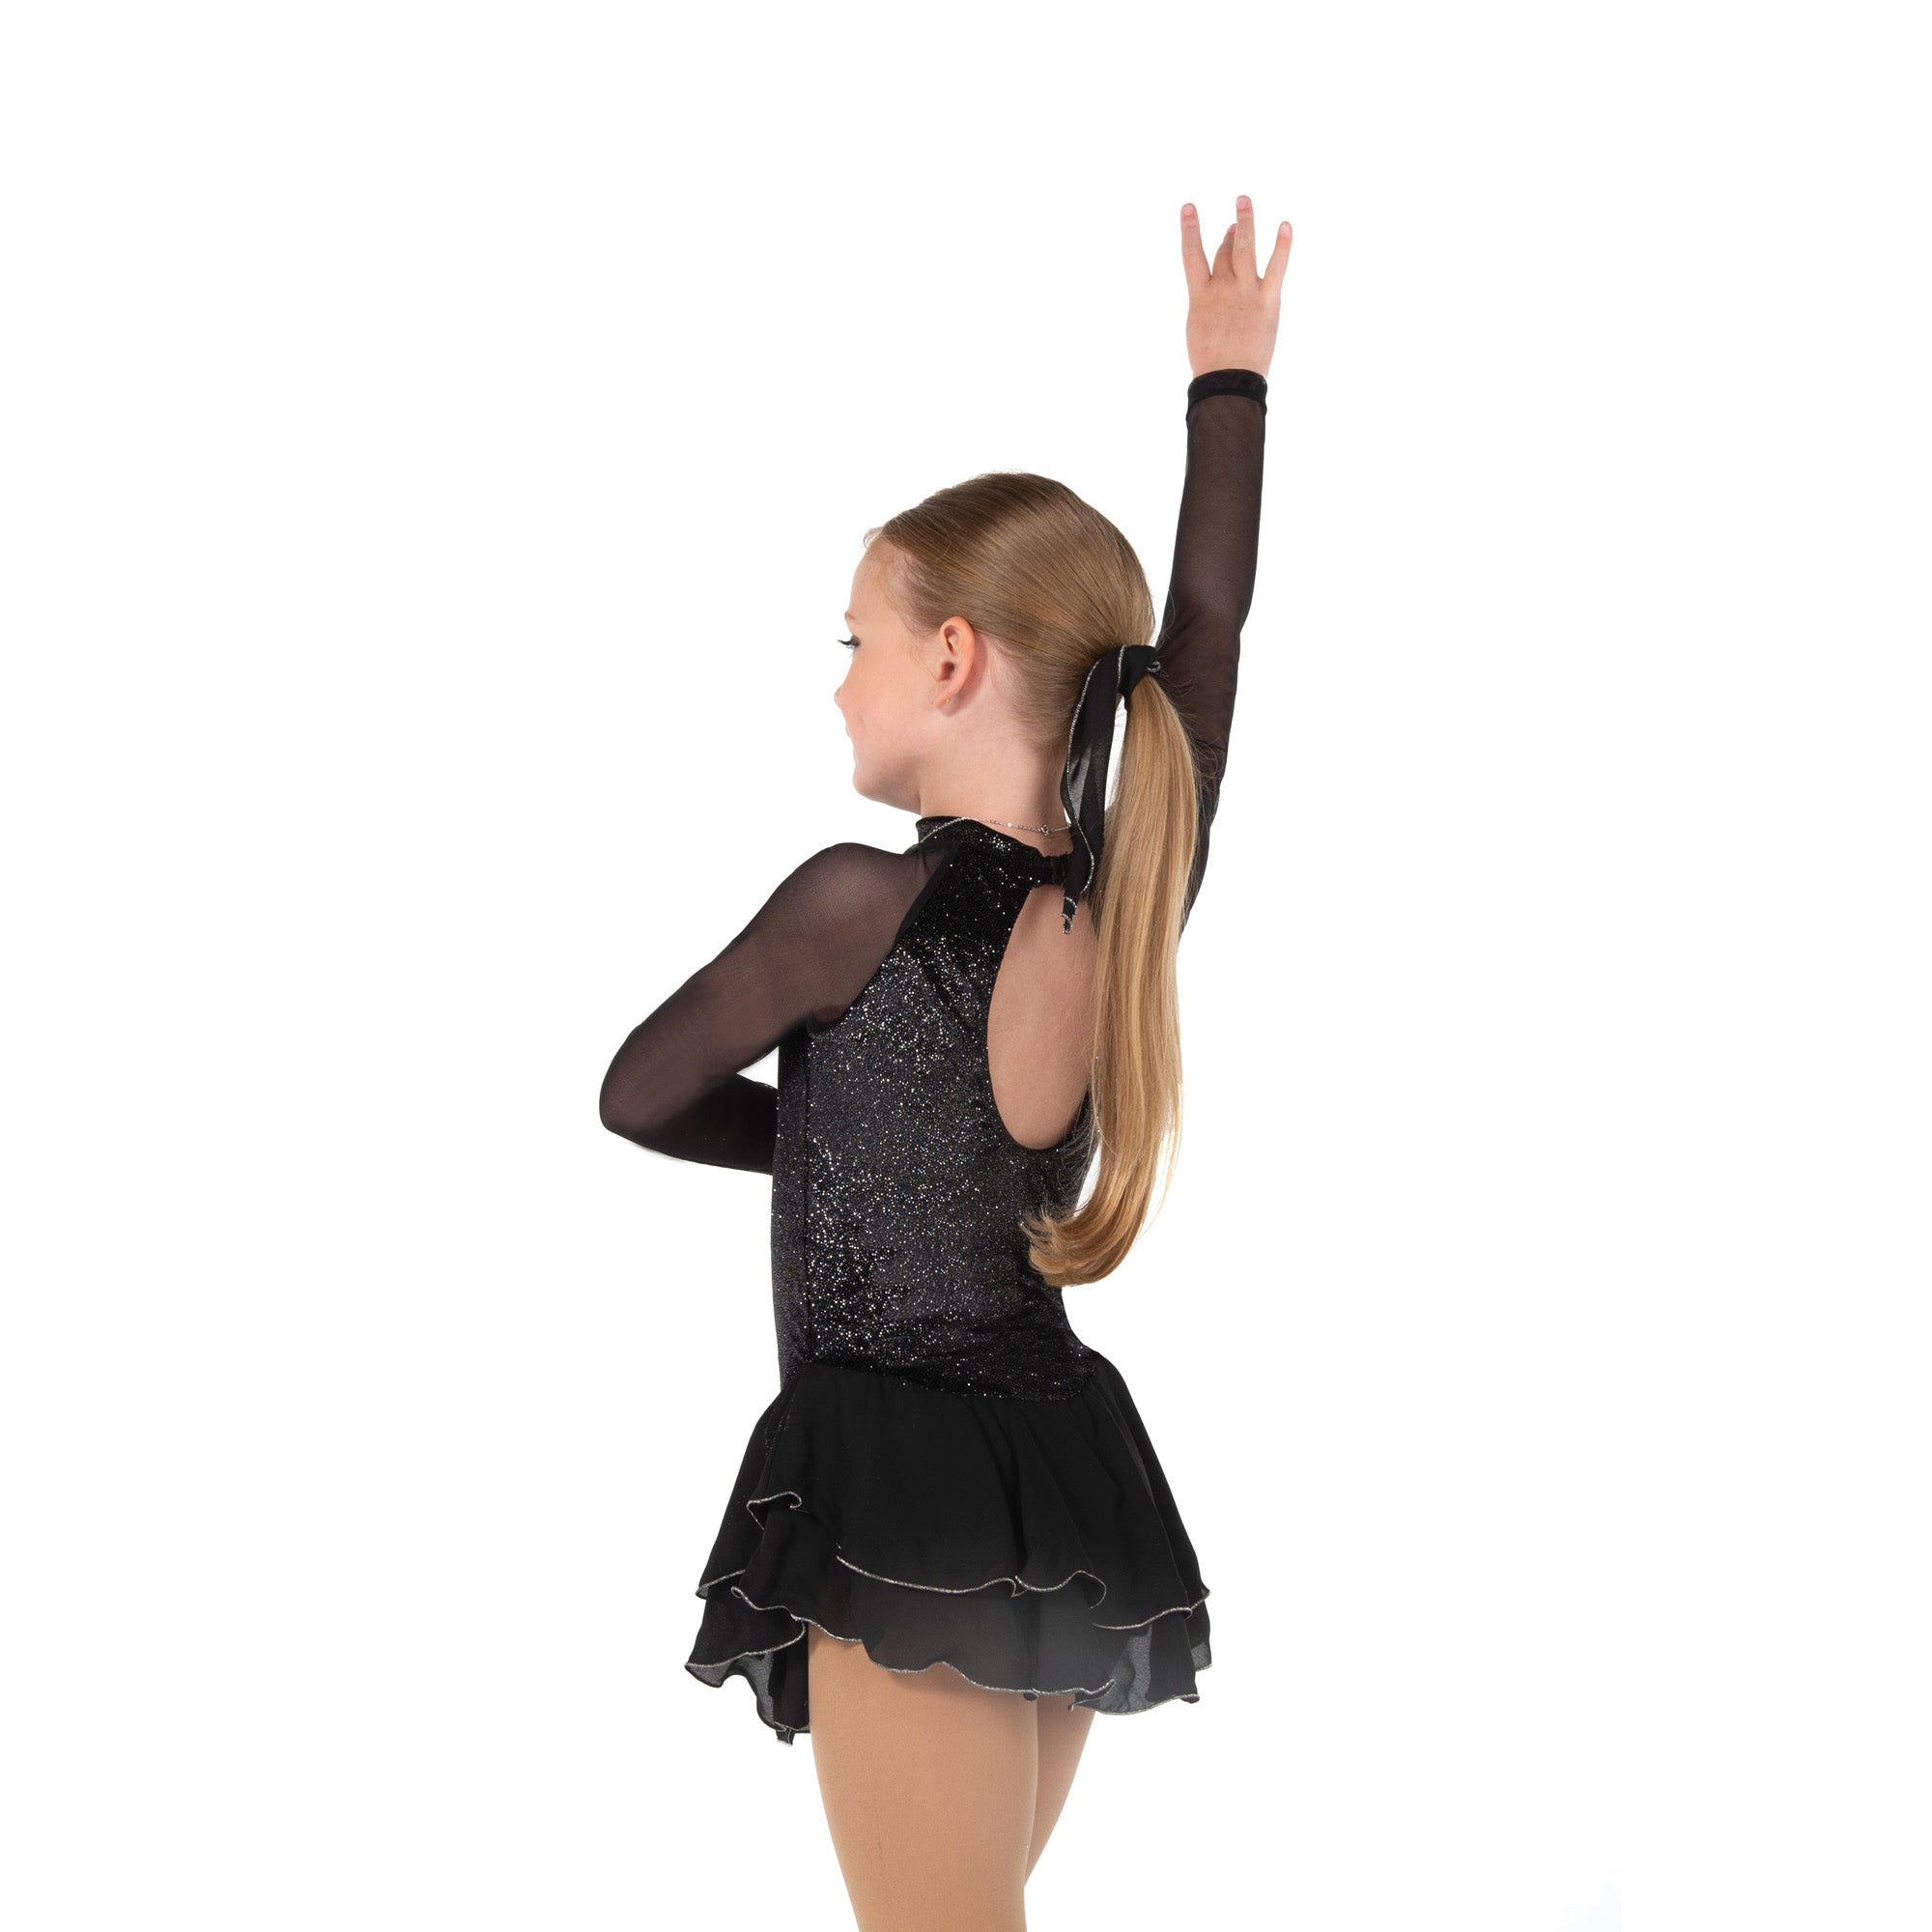 179 Shimmer Skating Dress in Black by Jerry's